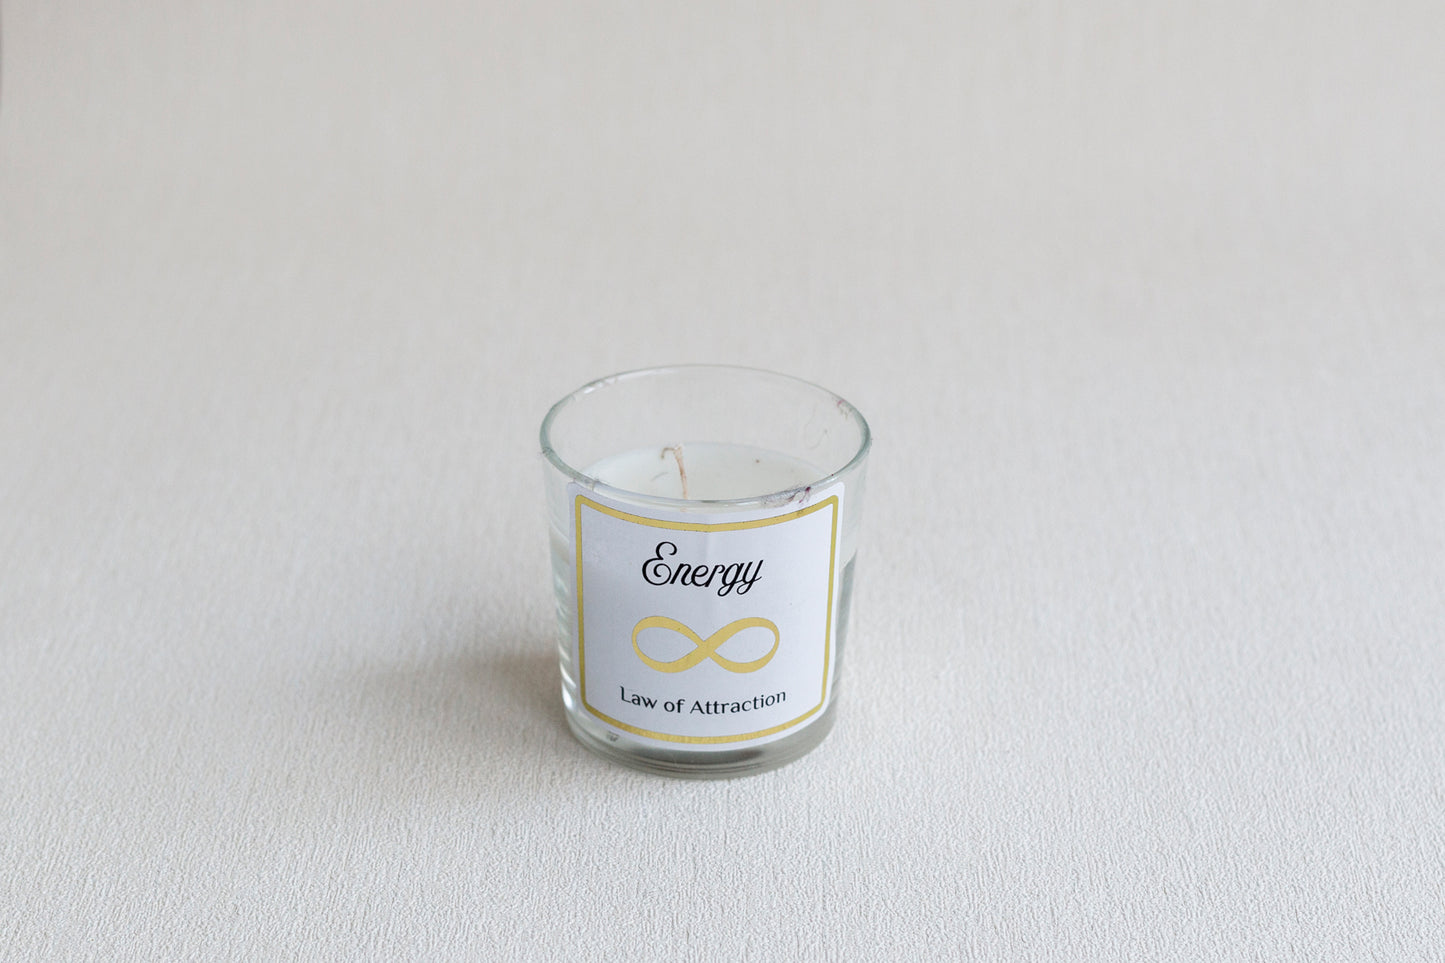 Law of Attraction Energy Candle